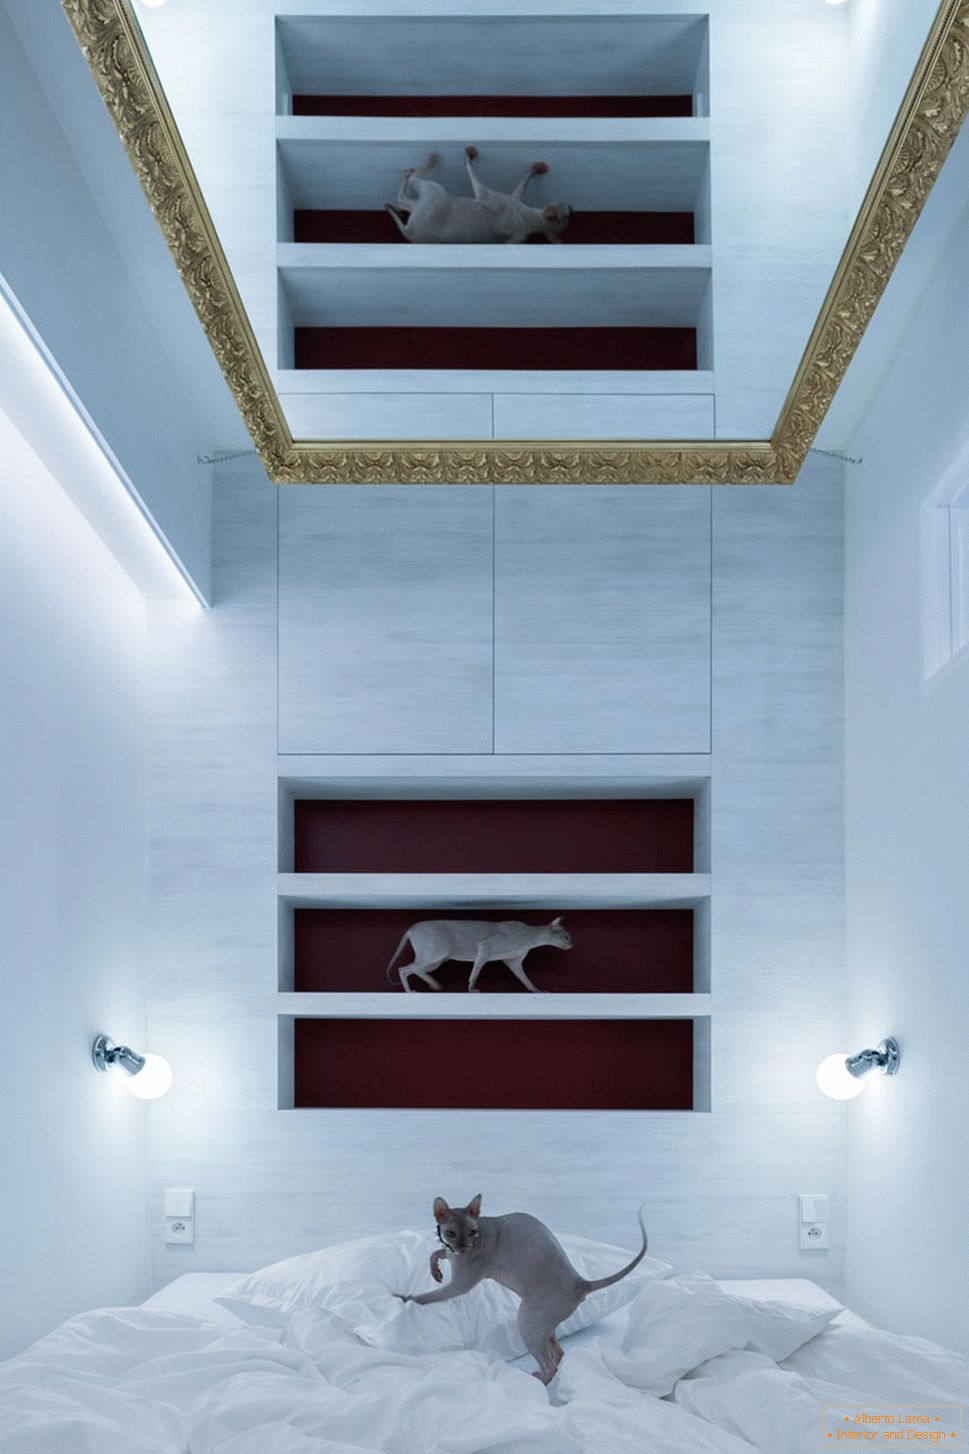 Modern design of a small apartment - cats in the interior